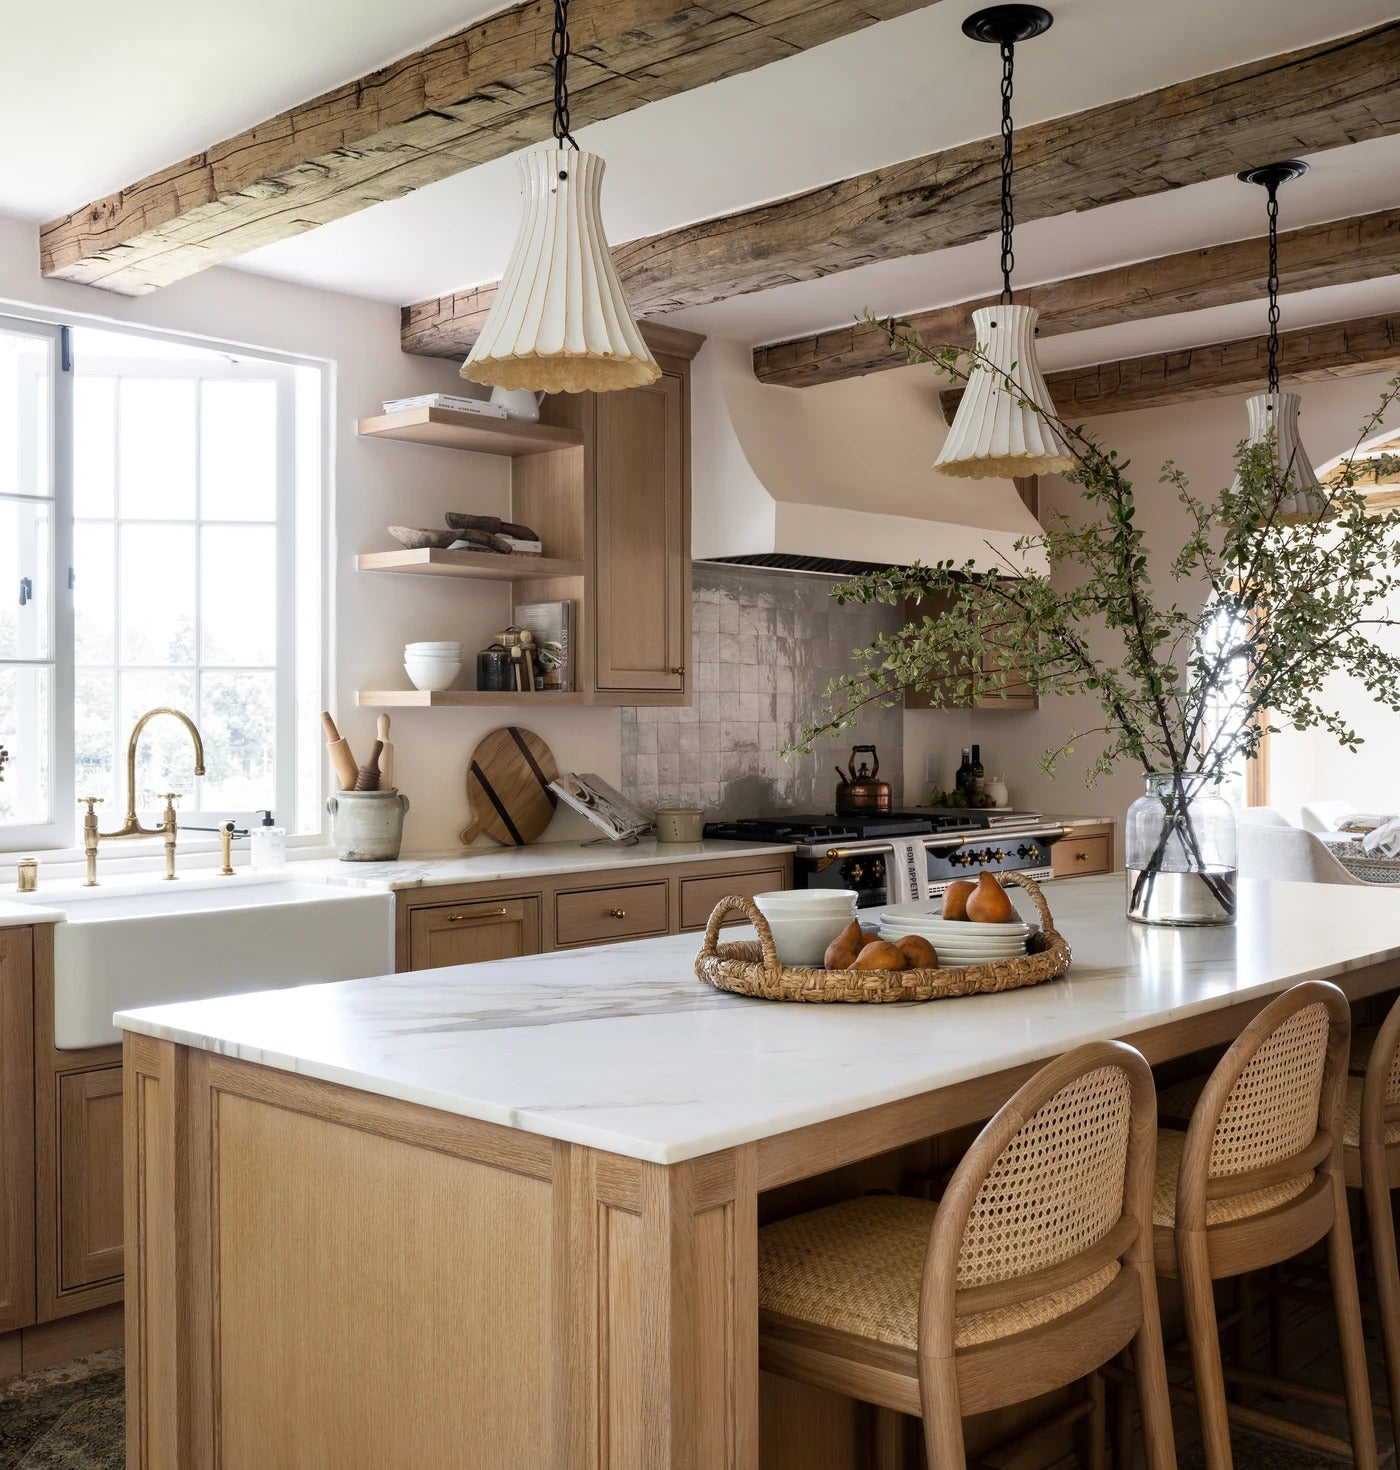 Shop our Sale in this Kitchen!! - Studio McGee